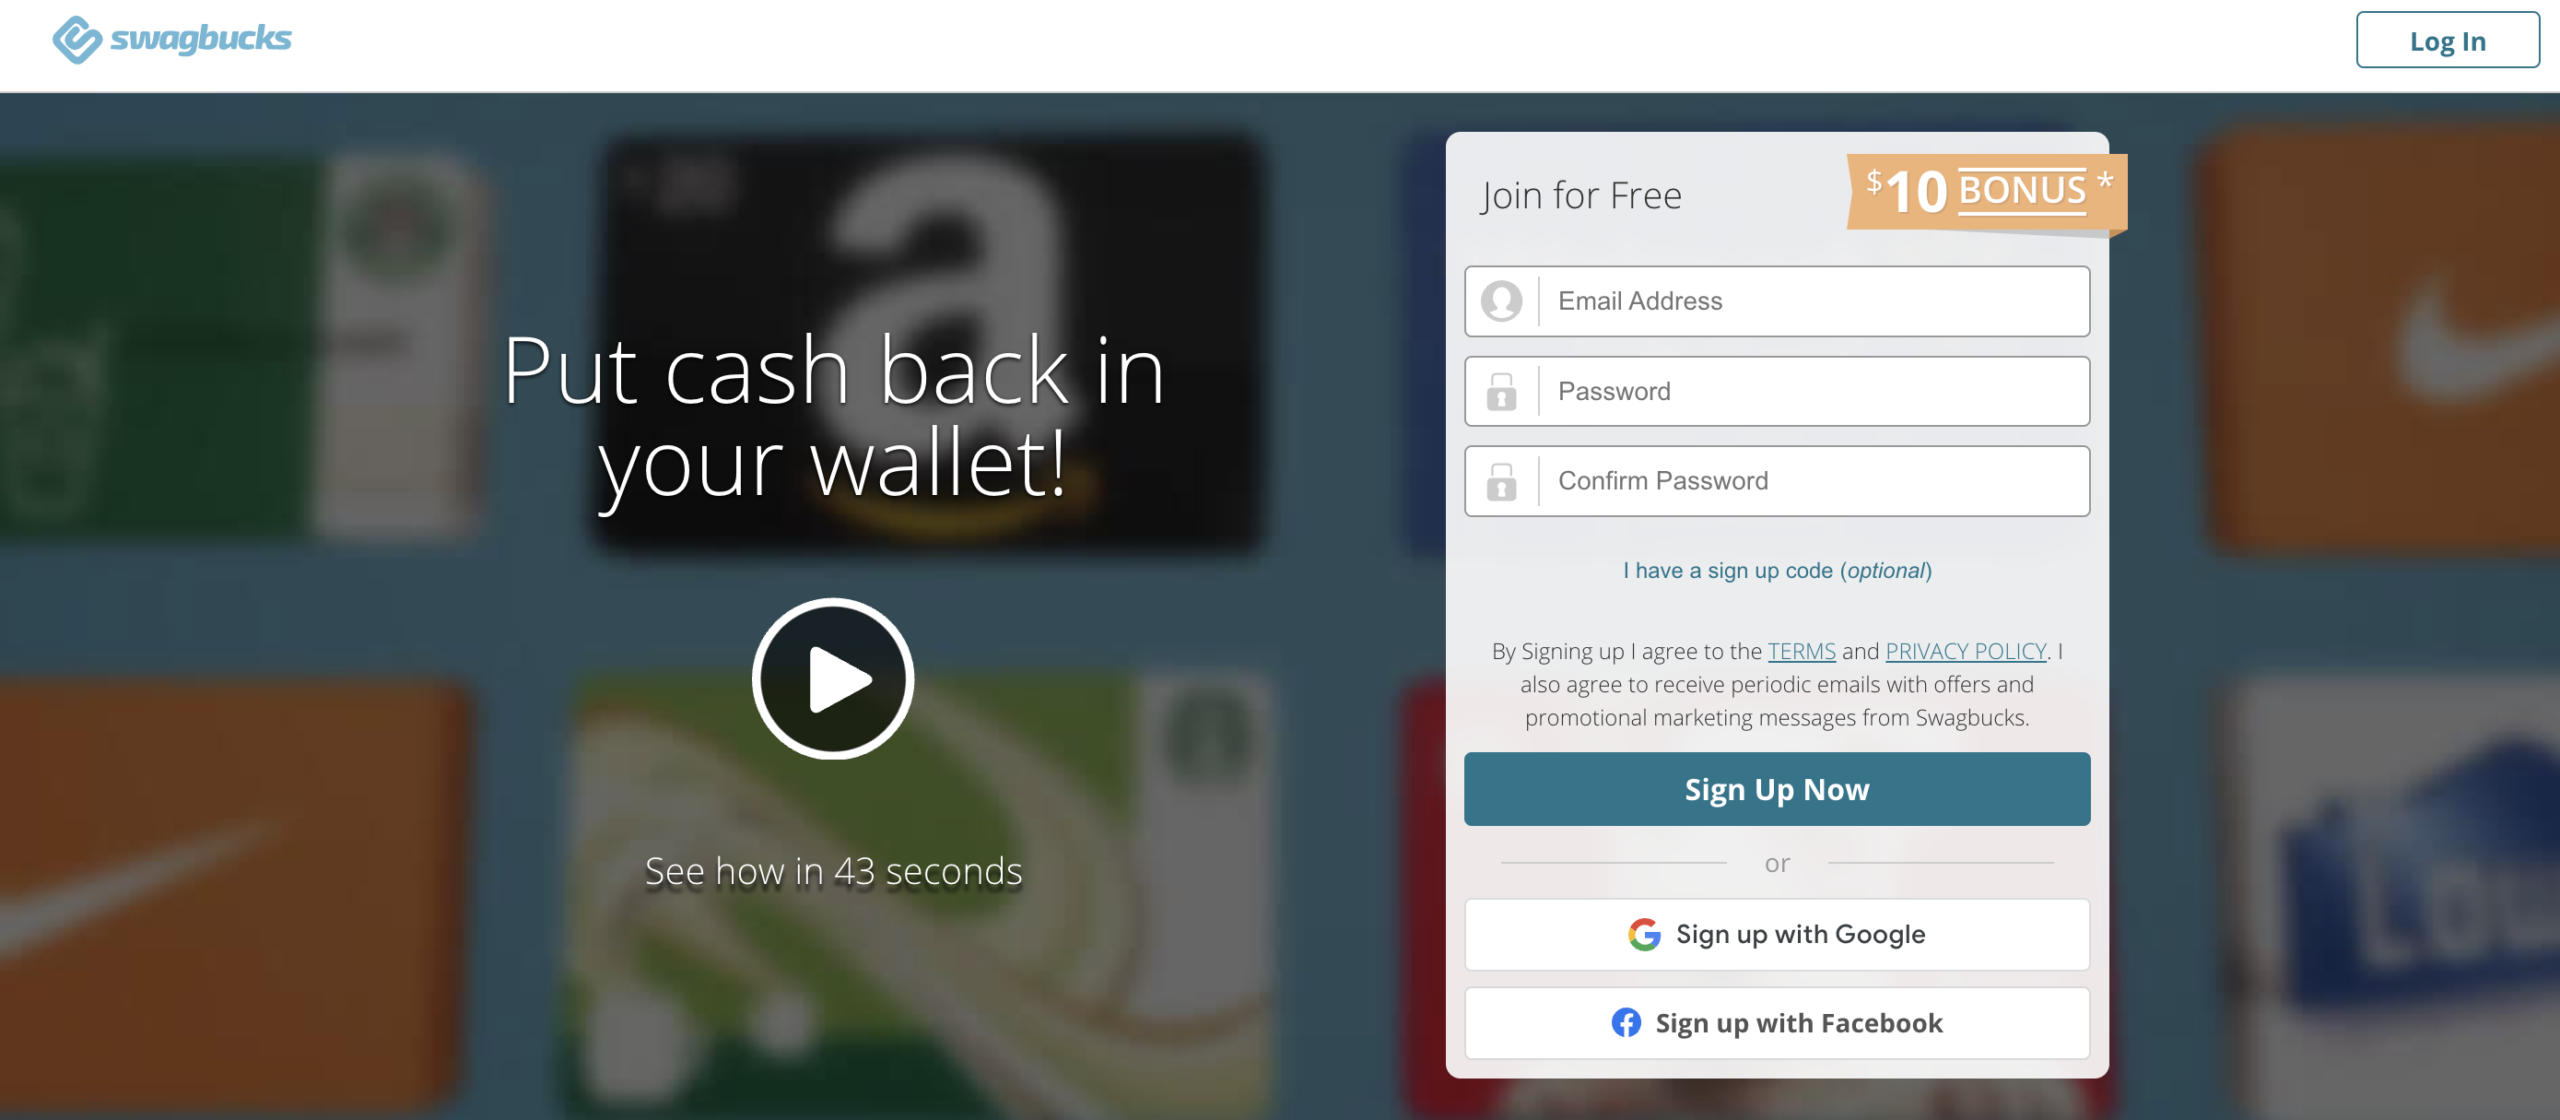 An image of the official Swagbucks homepage.